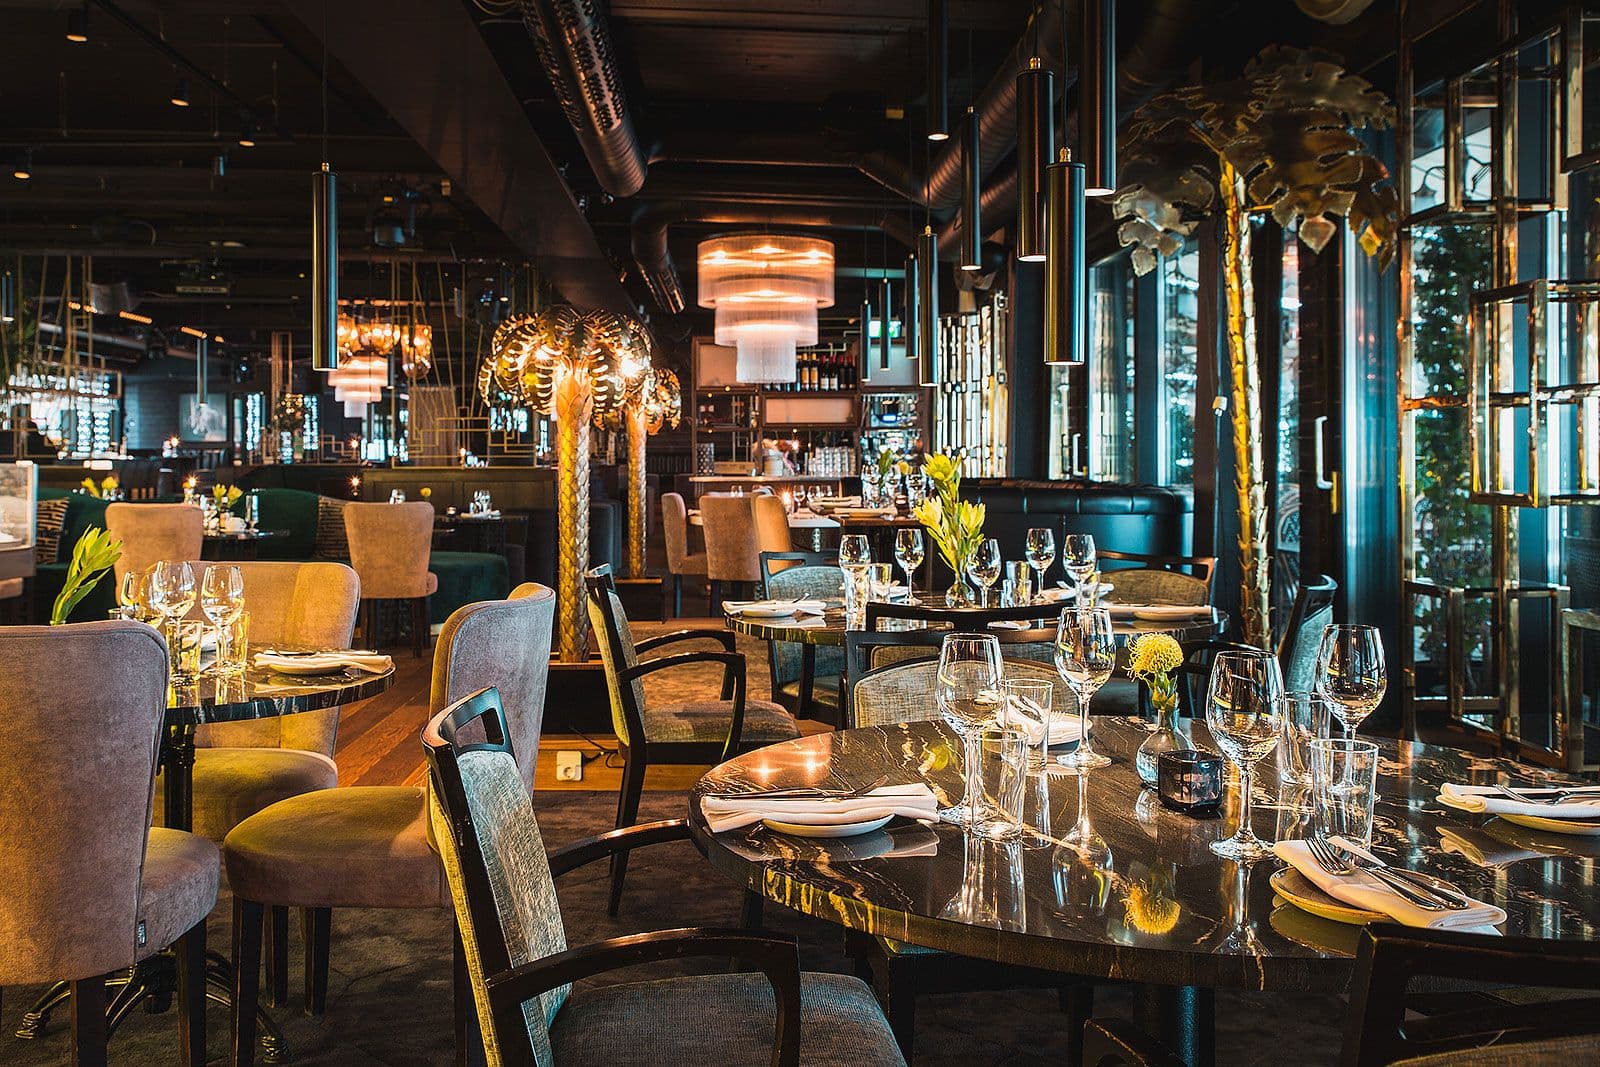 Mister French – The hottest restaurants right now